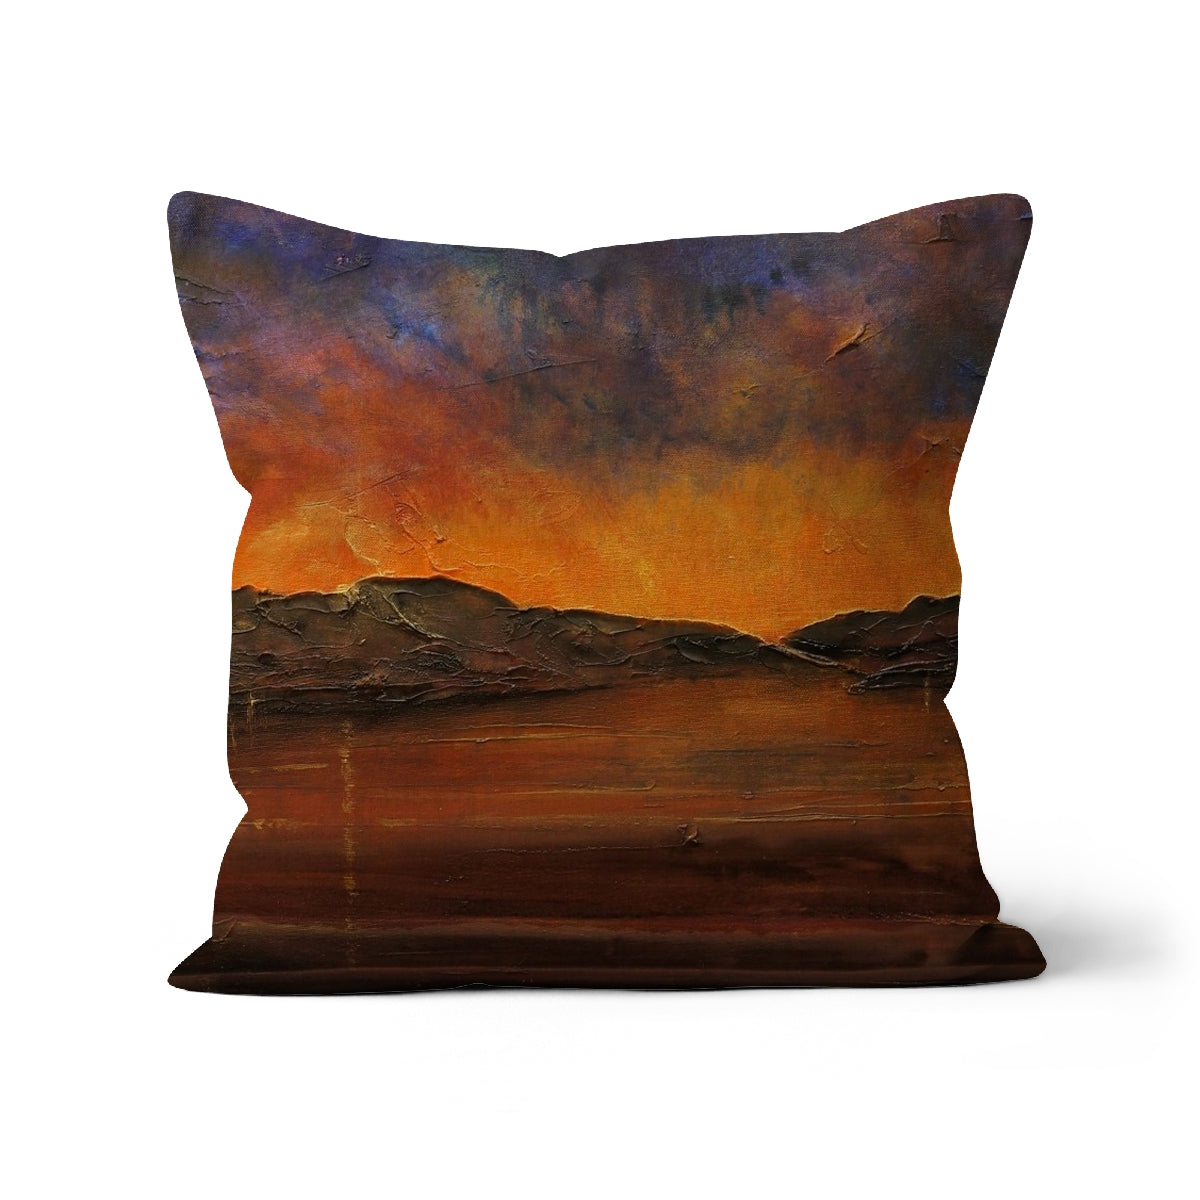 A Brooding Clyde Dusk Art Gifts Cushion-Cushions-River Clyde Art Gallery-Canvas-12"x12"-Paintings, Prints, Homeware, Art Gifts From Scotland By Scottish Artist Kevin Hunter